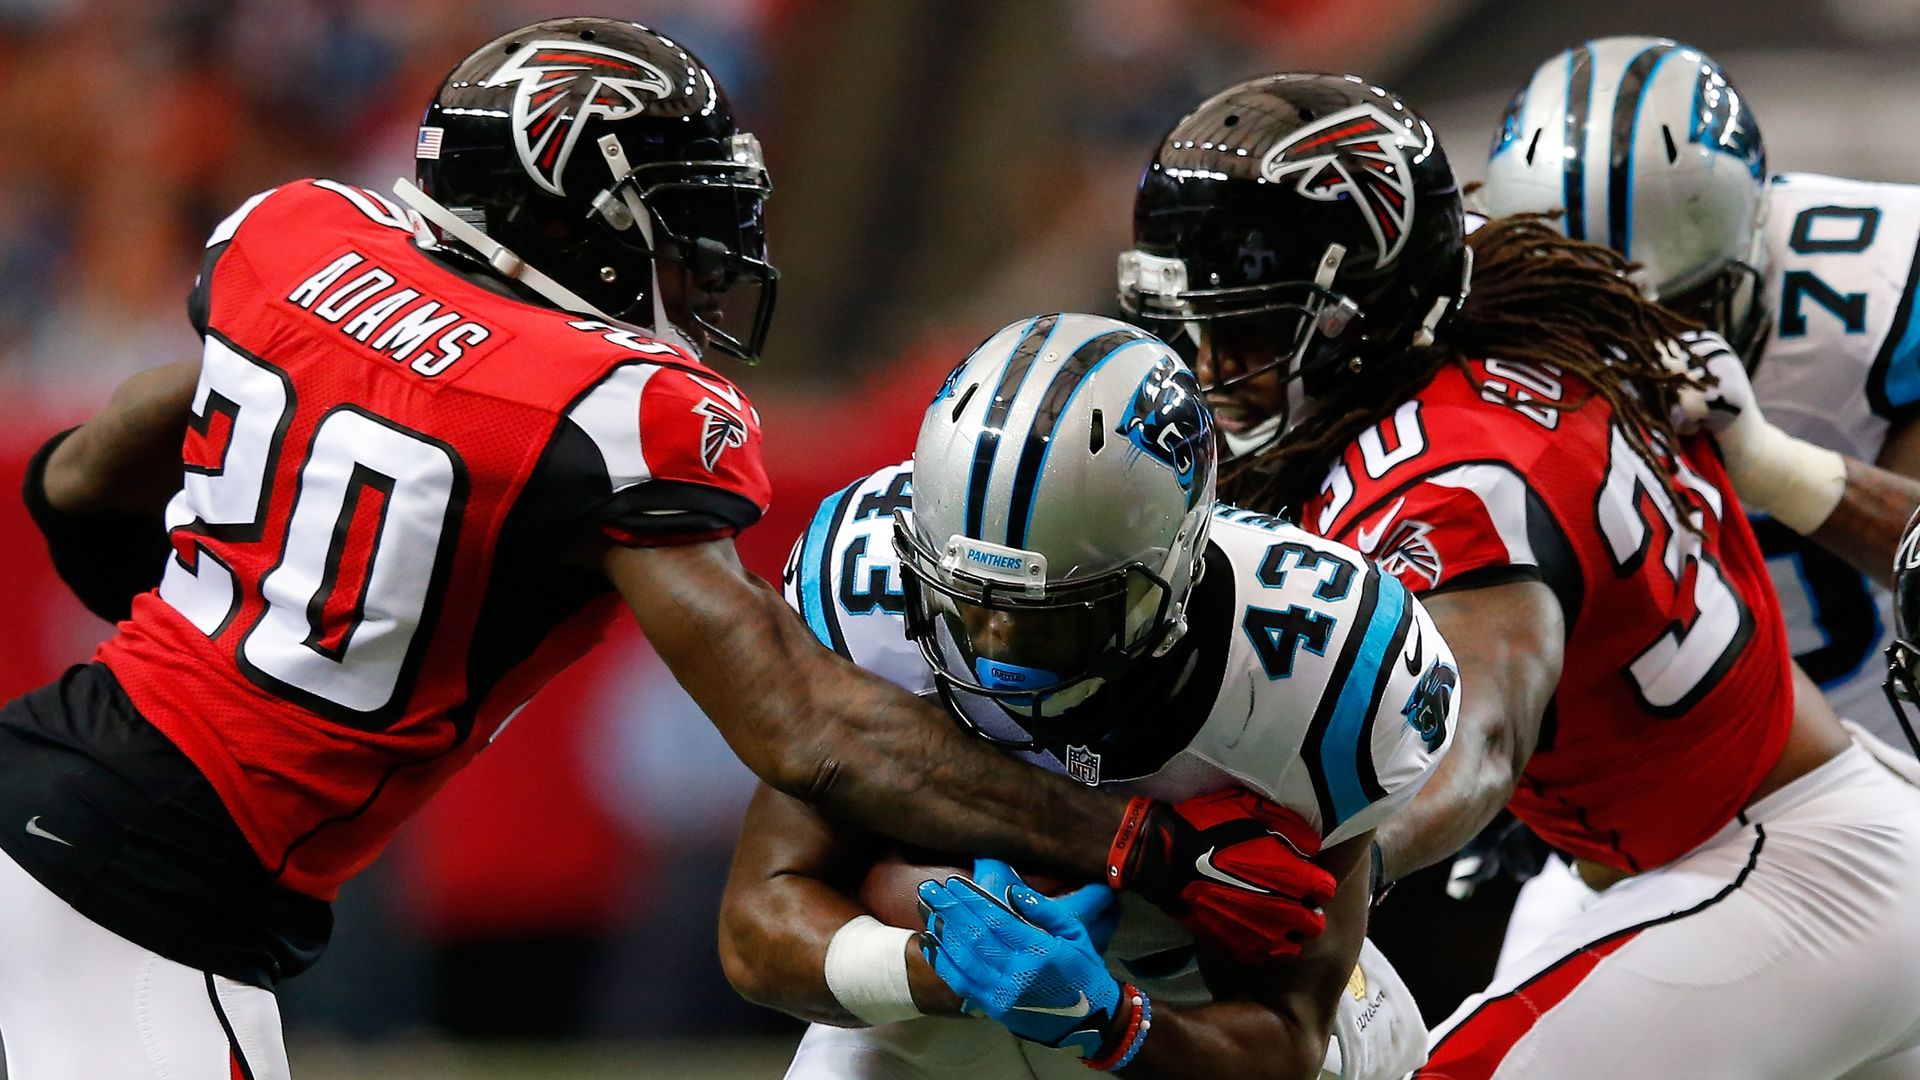 Fozzy Whittaker #43 of the Carolina Panthers runs the ball past Phillip Adams #20 and Charles Godfrey #30 of the Atlanta Falcons.